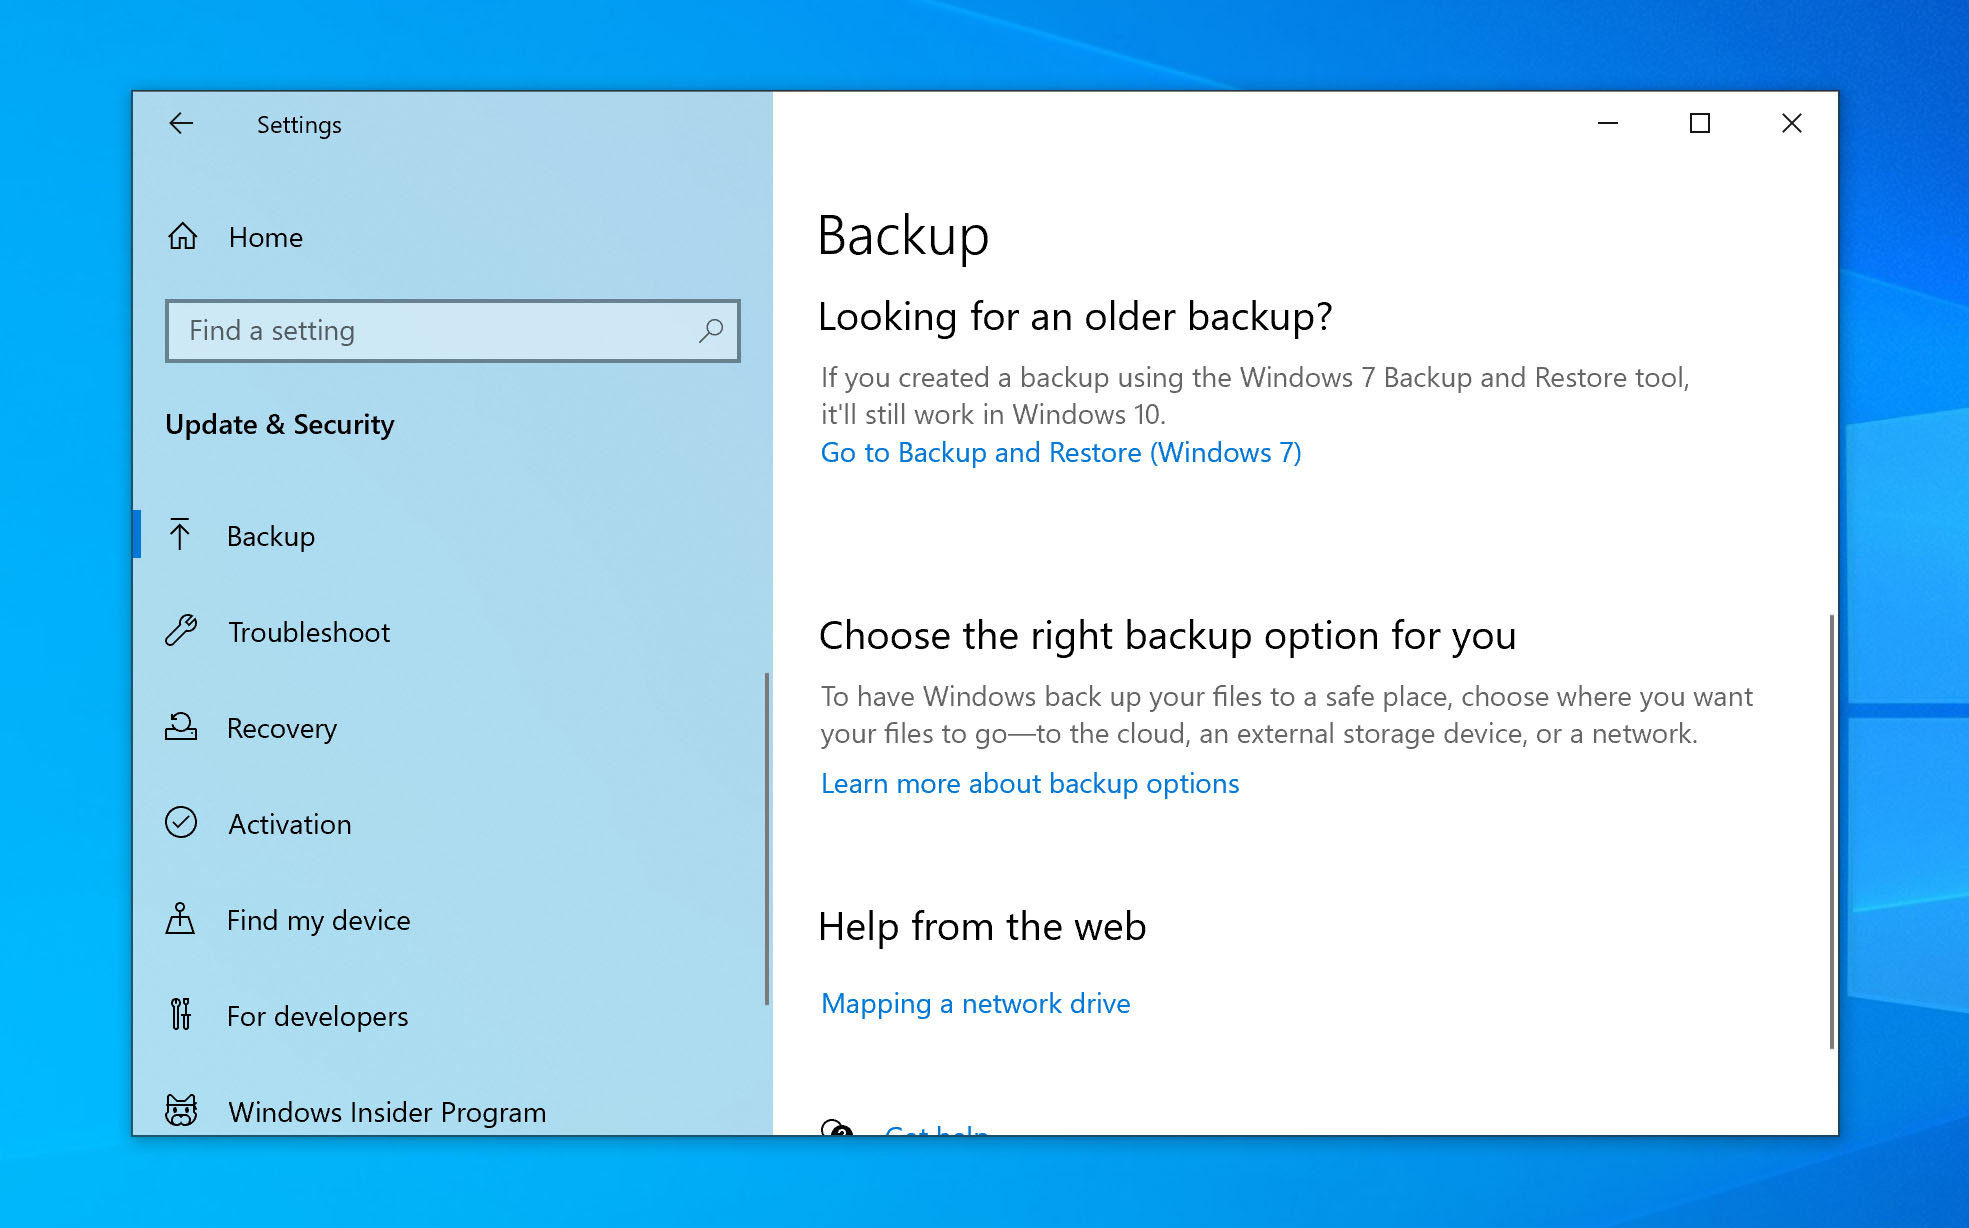 Image depicting how to access Backup and Restore (Windows 7) feature on Windows 10 for Recycle Bin recovery